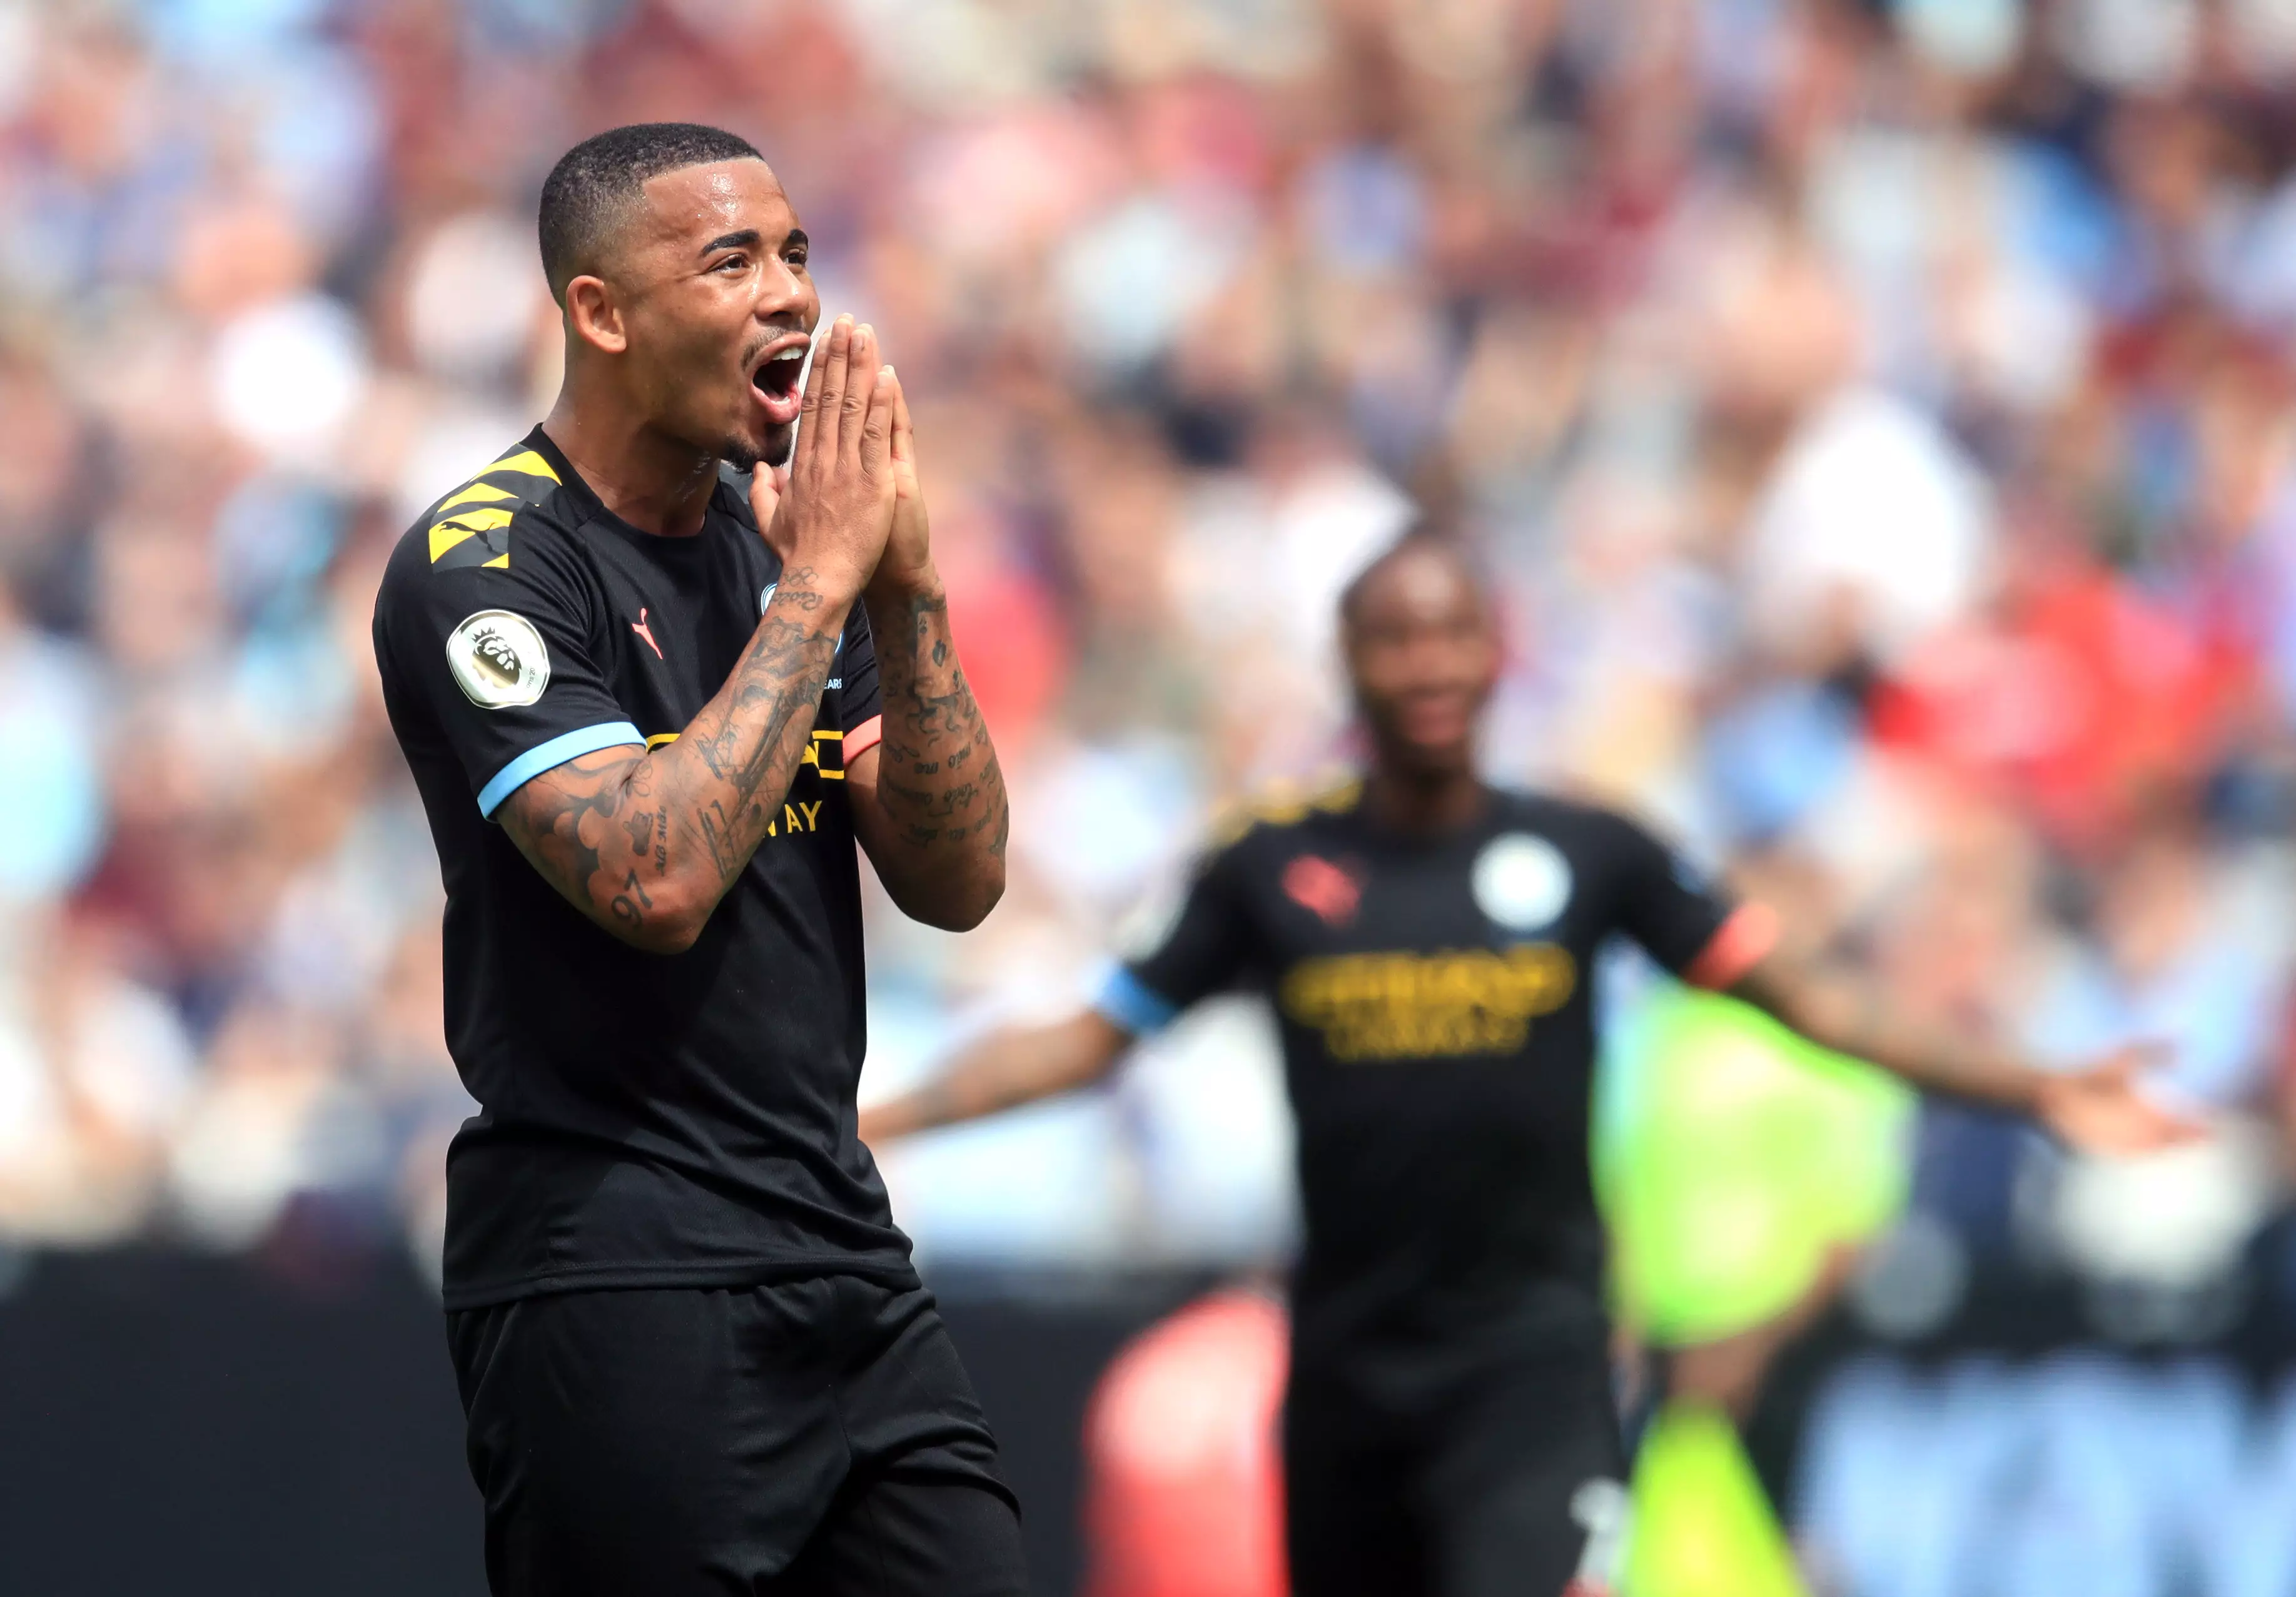 Gabriel Jesus had a goal disallowed in Manchester City's win at West Ham after being adjudged offside by the slimmest of margins